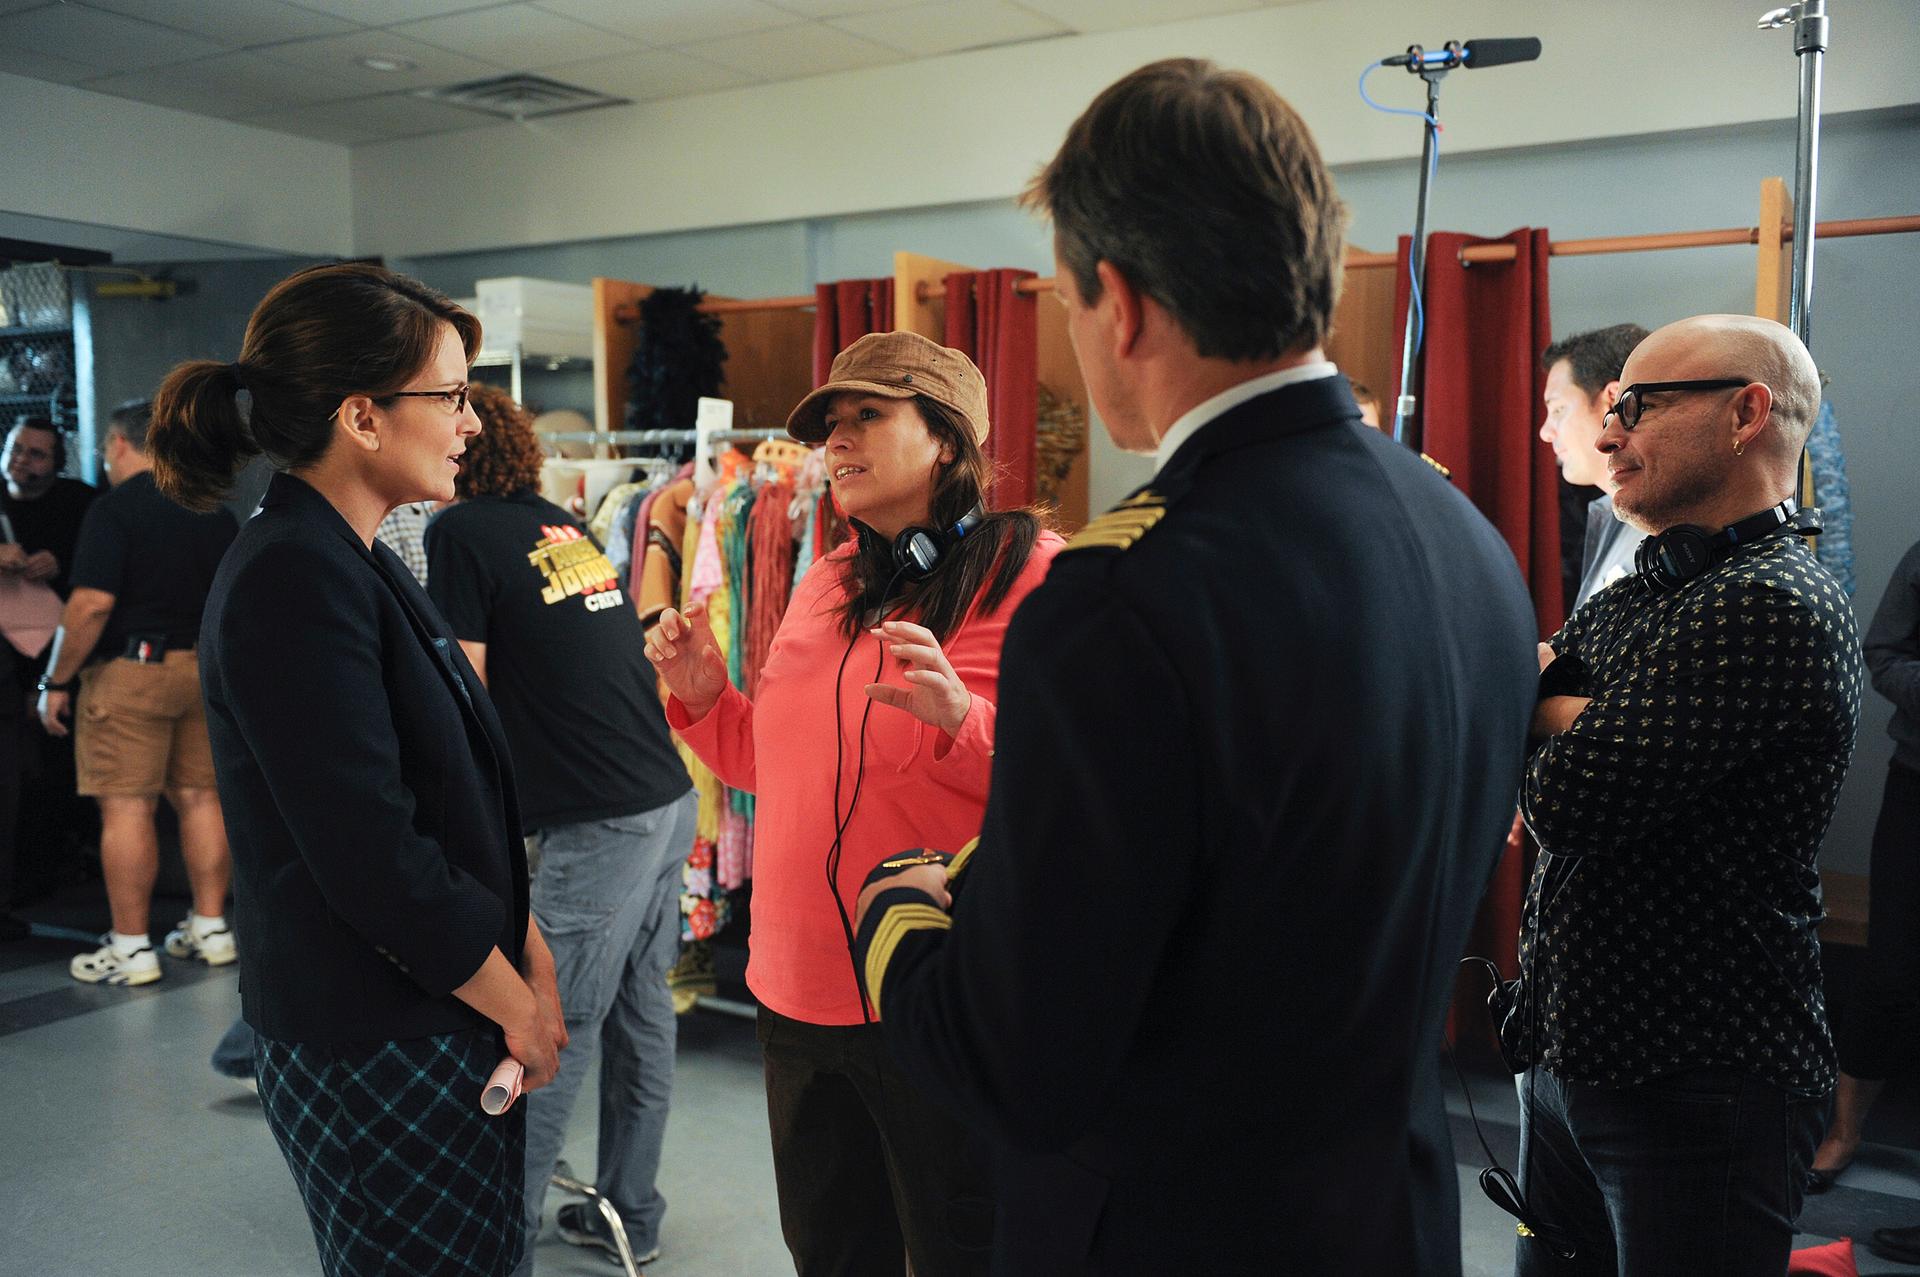 Beth McCarthy-Miller (center) on the set of “30 Rock” with Tina Fey (left) and guest star Matt Damon (right).